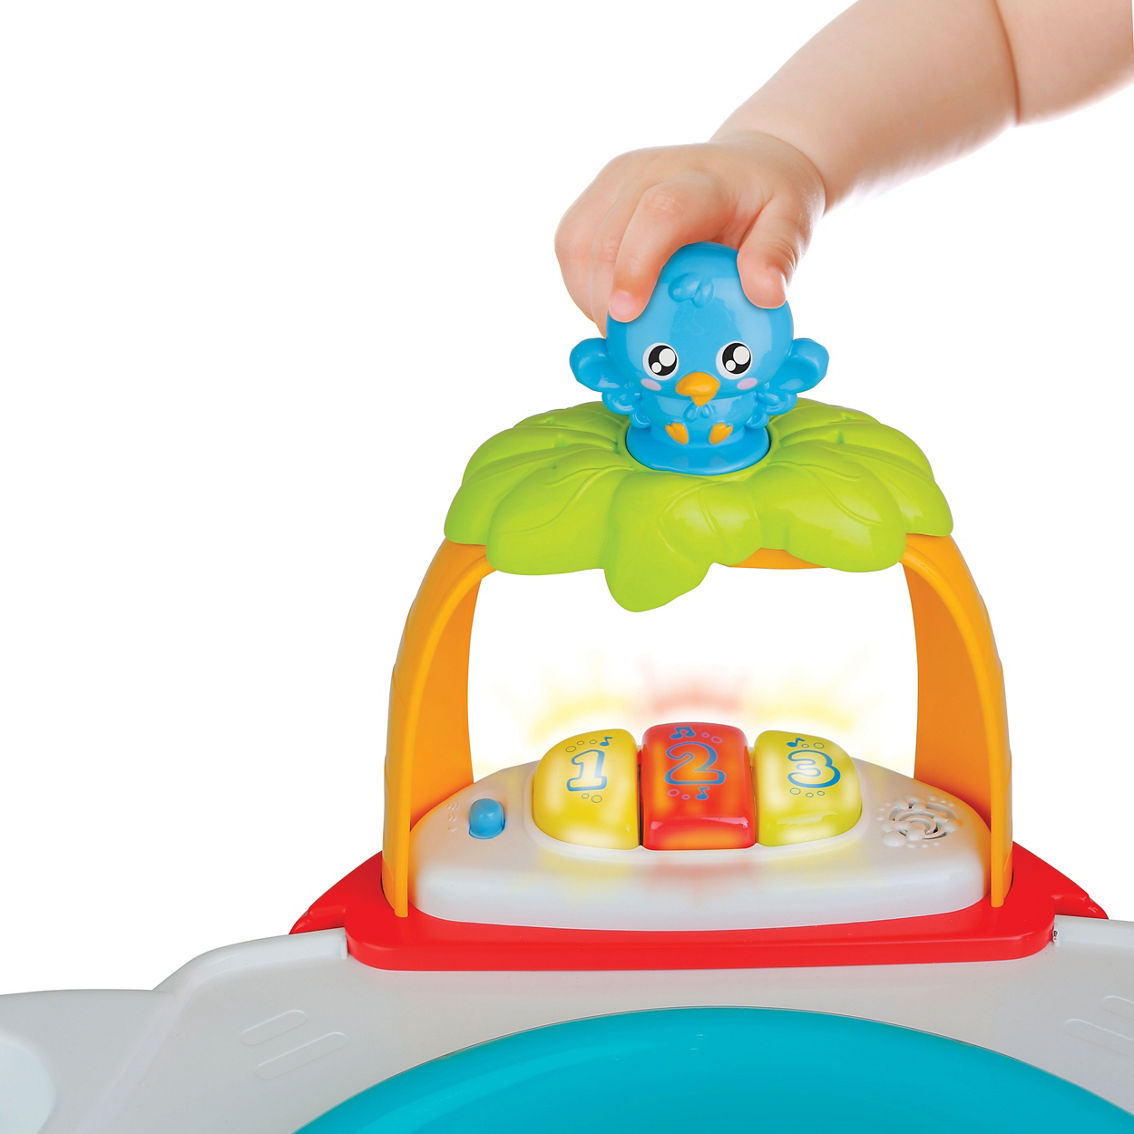 Winfun Baby Move Activity Center - Image 4 of 5